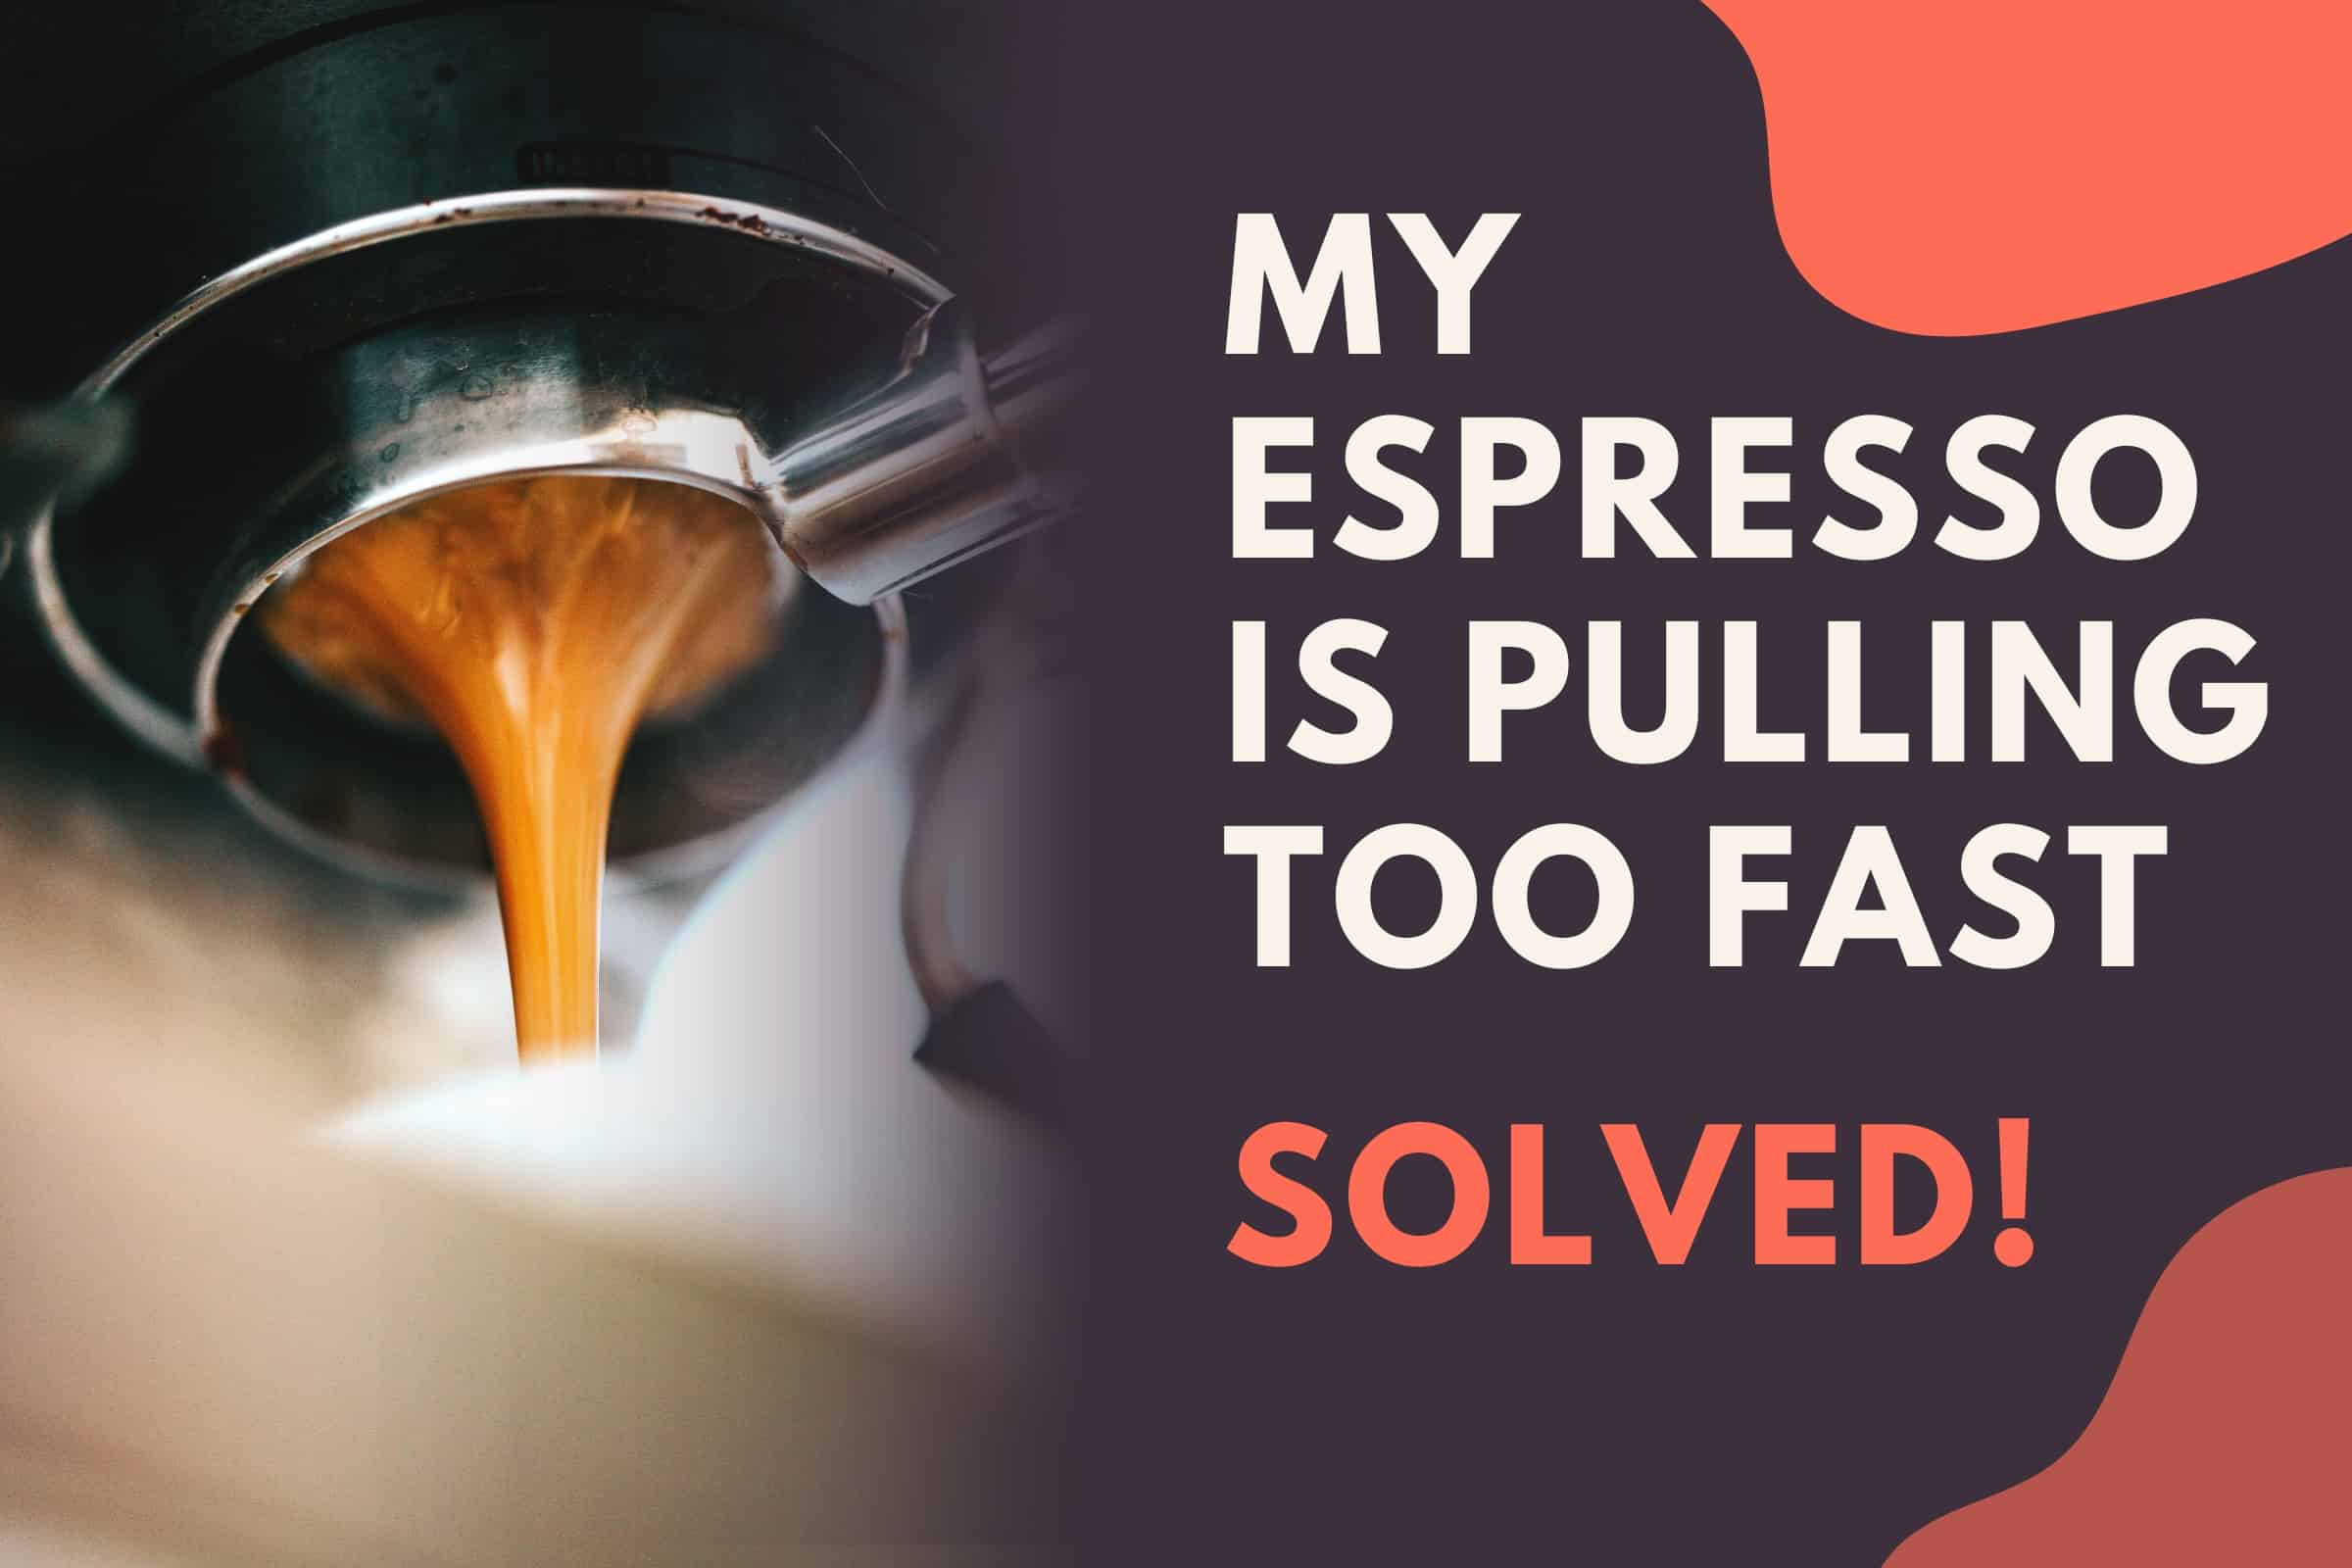 My espresso is pulling too fast